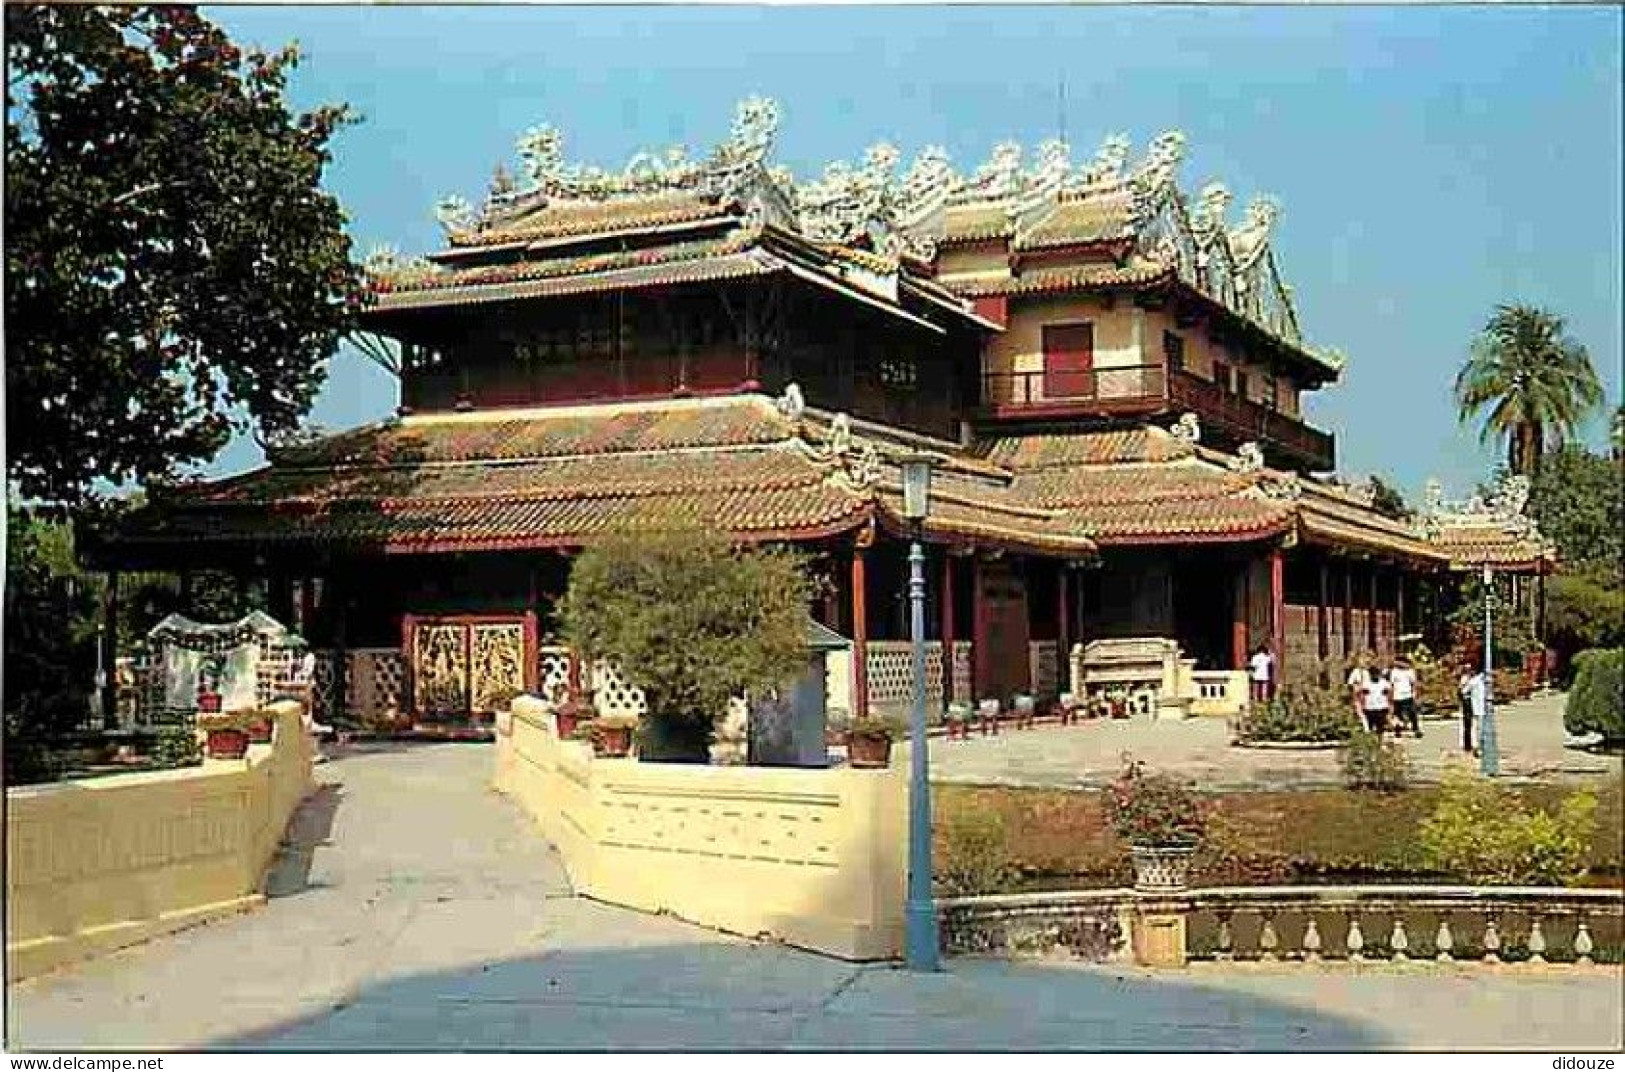 Thailande - The Chinese Style Of Veharsjamrun Thron Hall In The Royal Summer Palace - Bang Pa In - Ayudhya Province - CP - Thaïlande